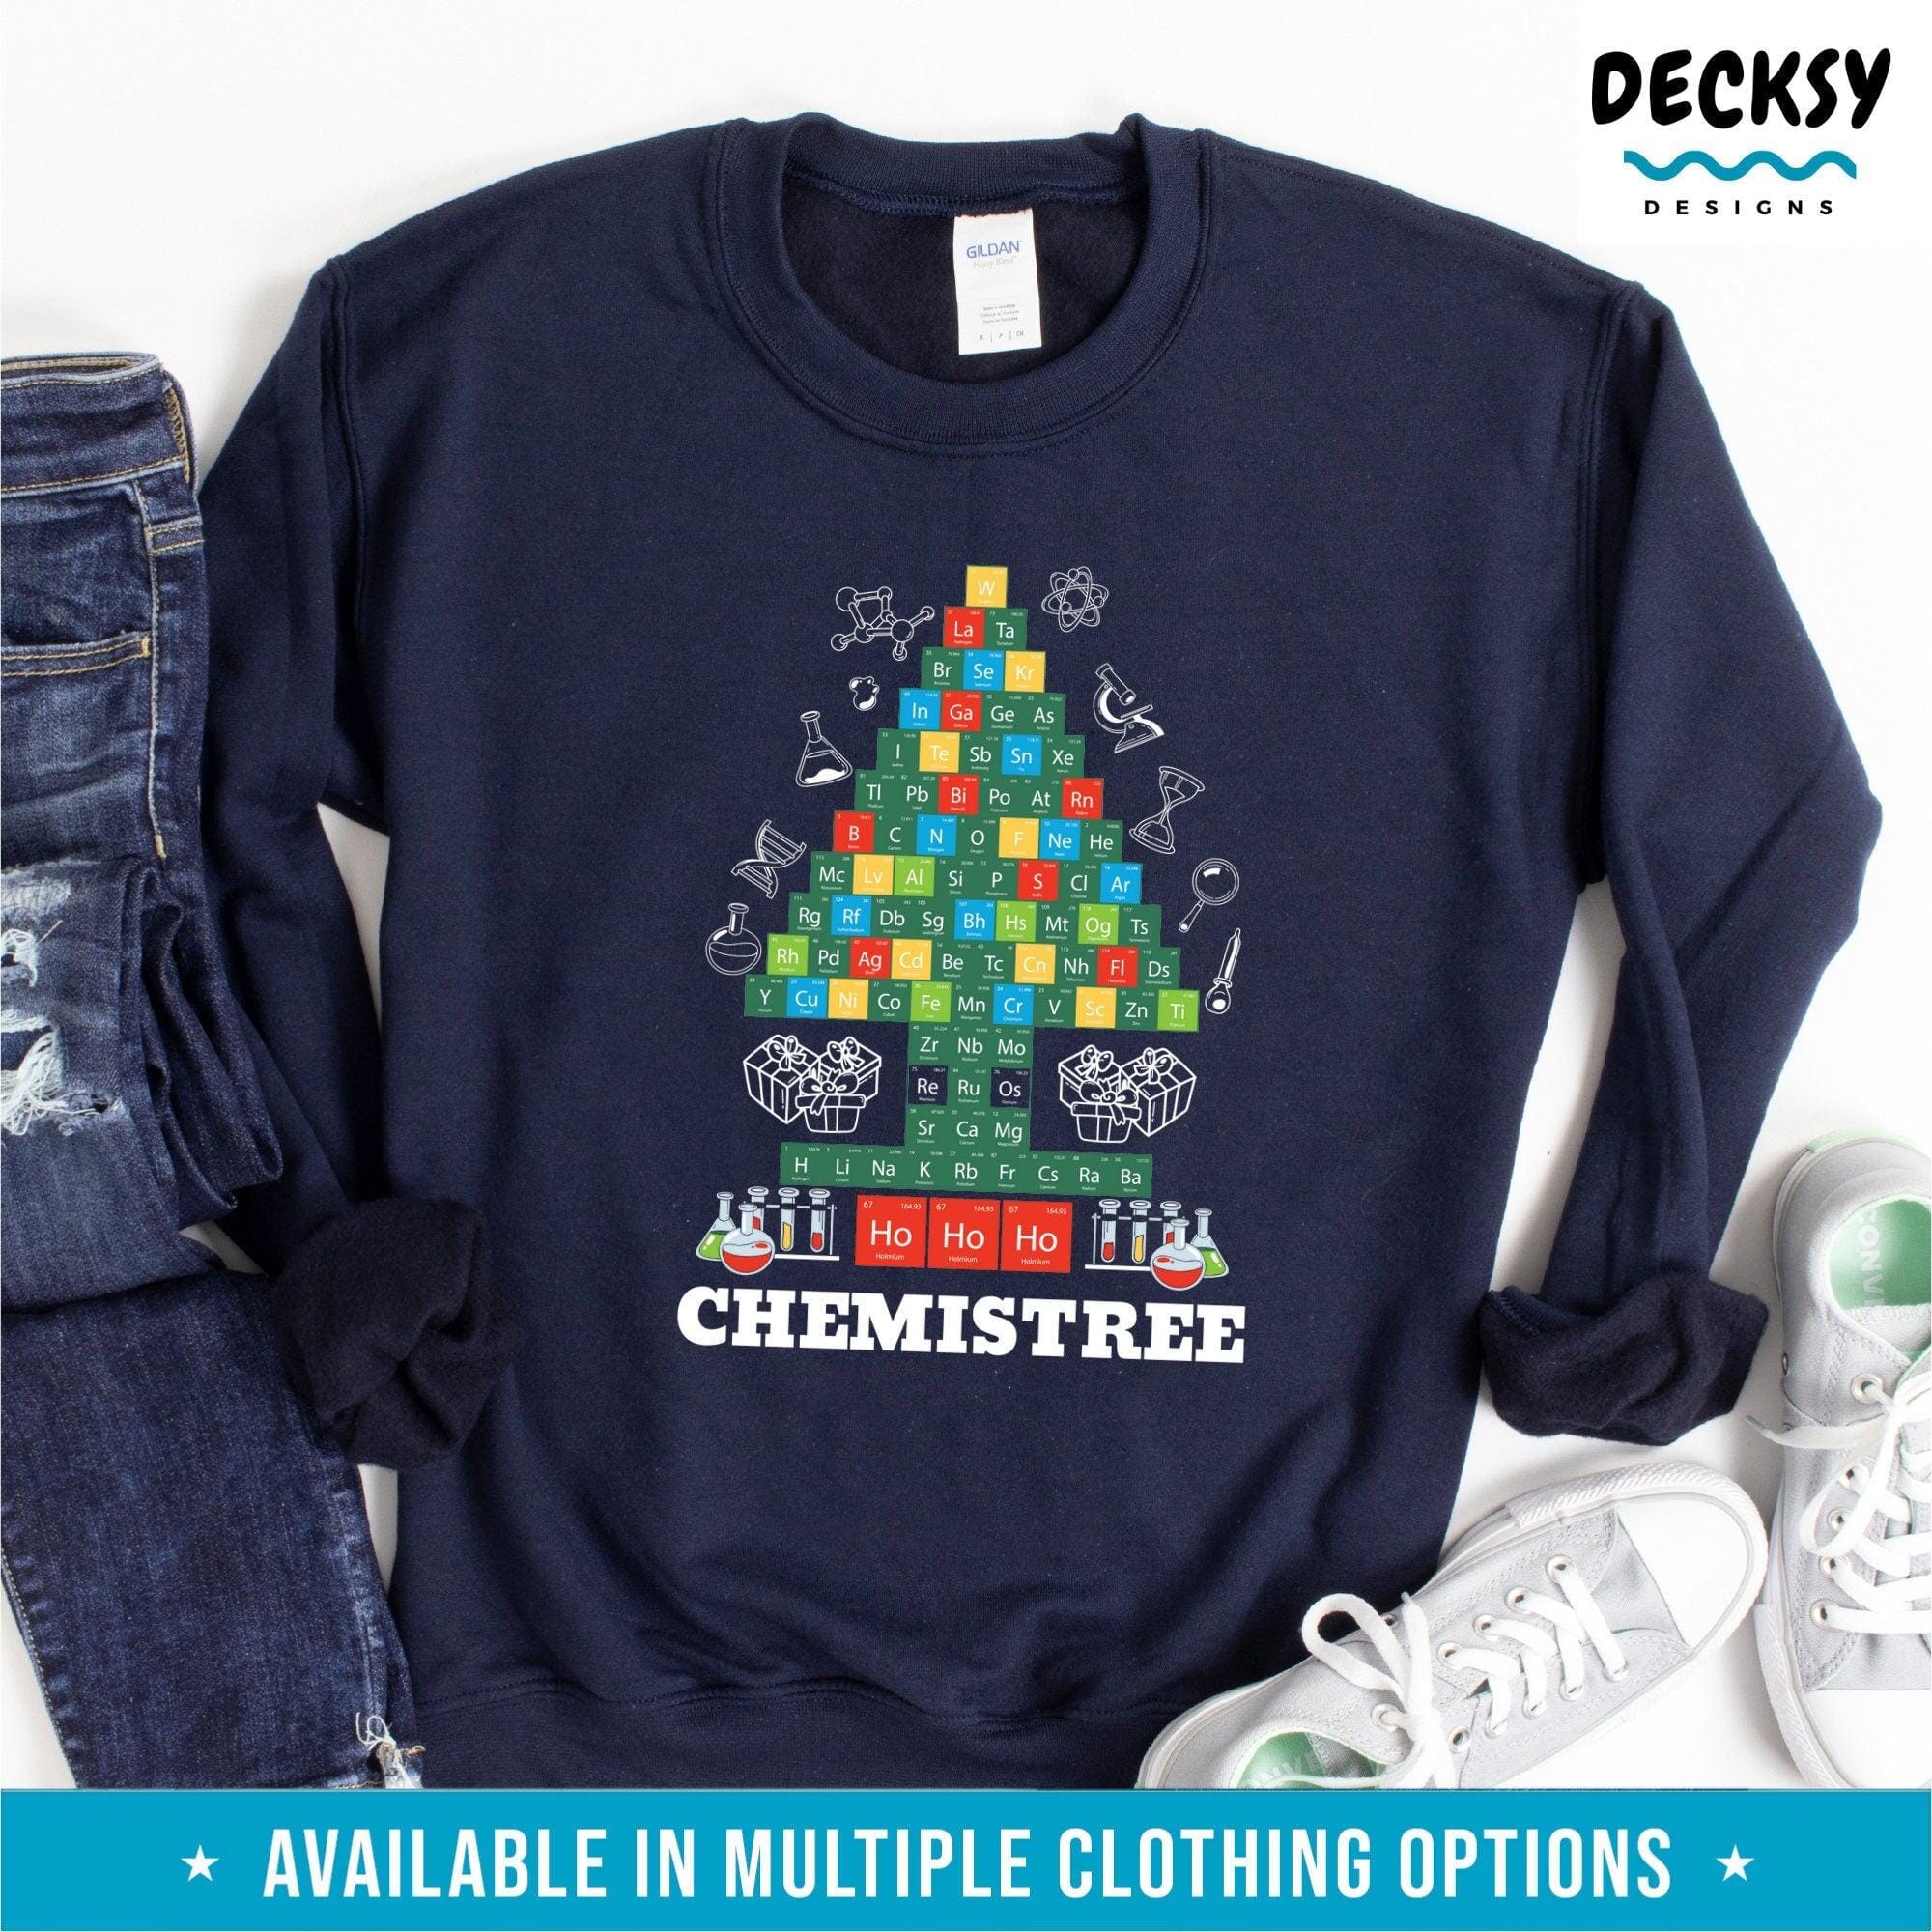 Chemistry Tshirt Gift, Chemistry Teacher Gift-Clothing:Gender-Neutral Adult Clothing:Tops & Tees:T-shirts:Graphic Tees-DecksyDesigns